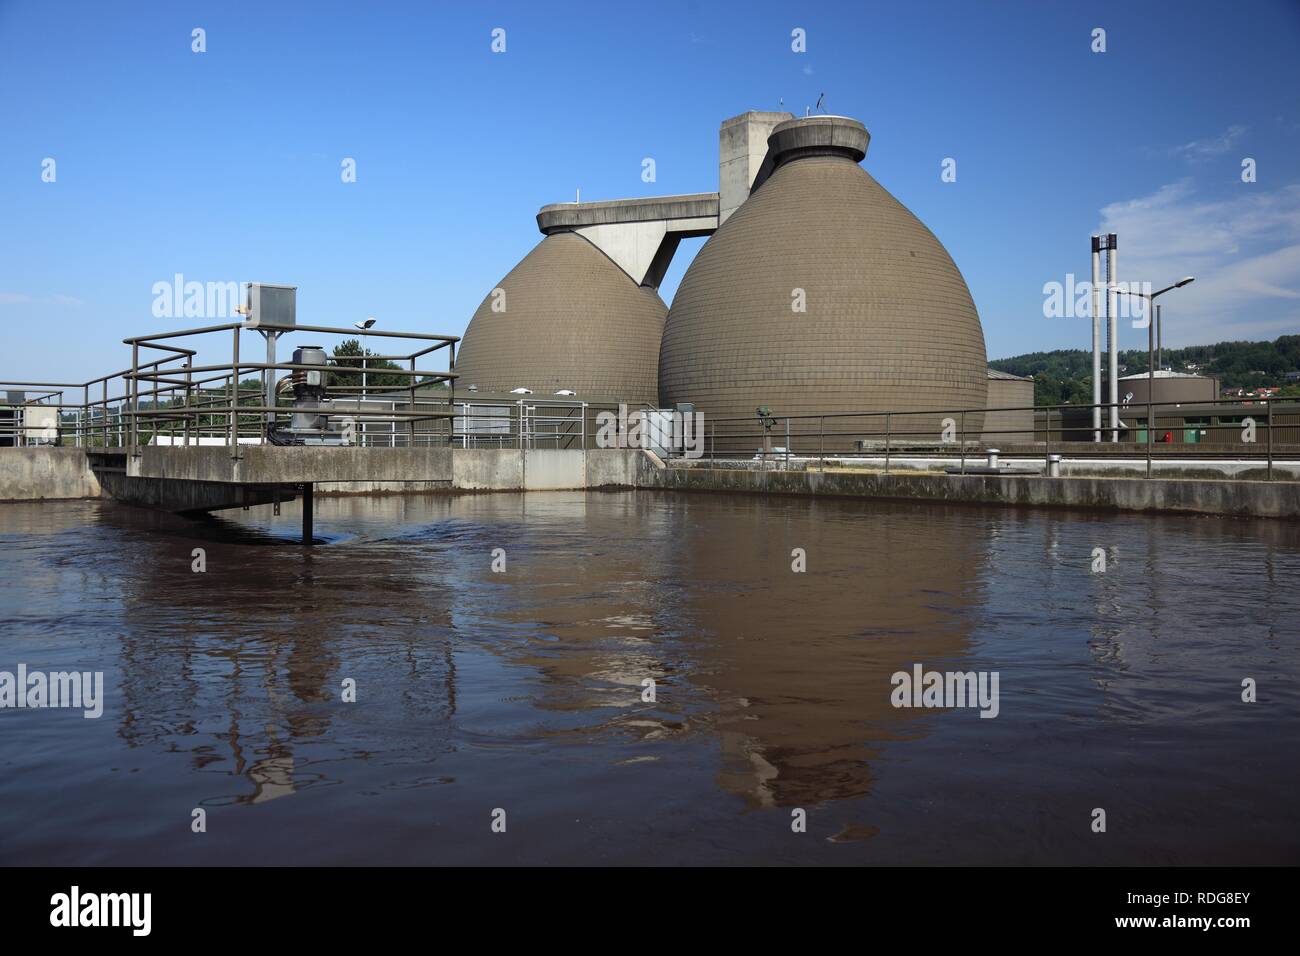 Modern sewage treatment plant, view over a recirculation basin on digester towers, Kulmbach, Bavaria Stock Photo